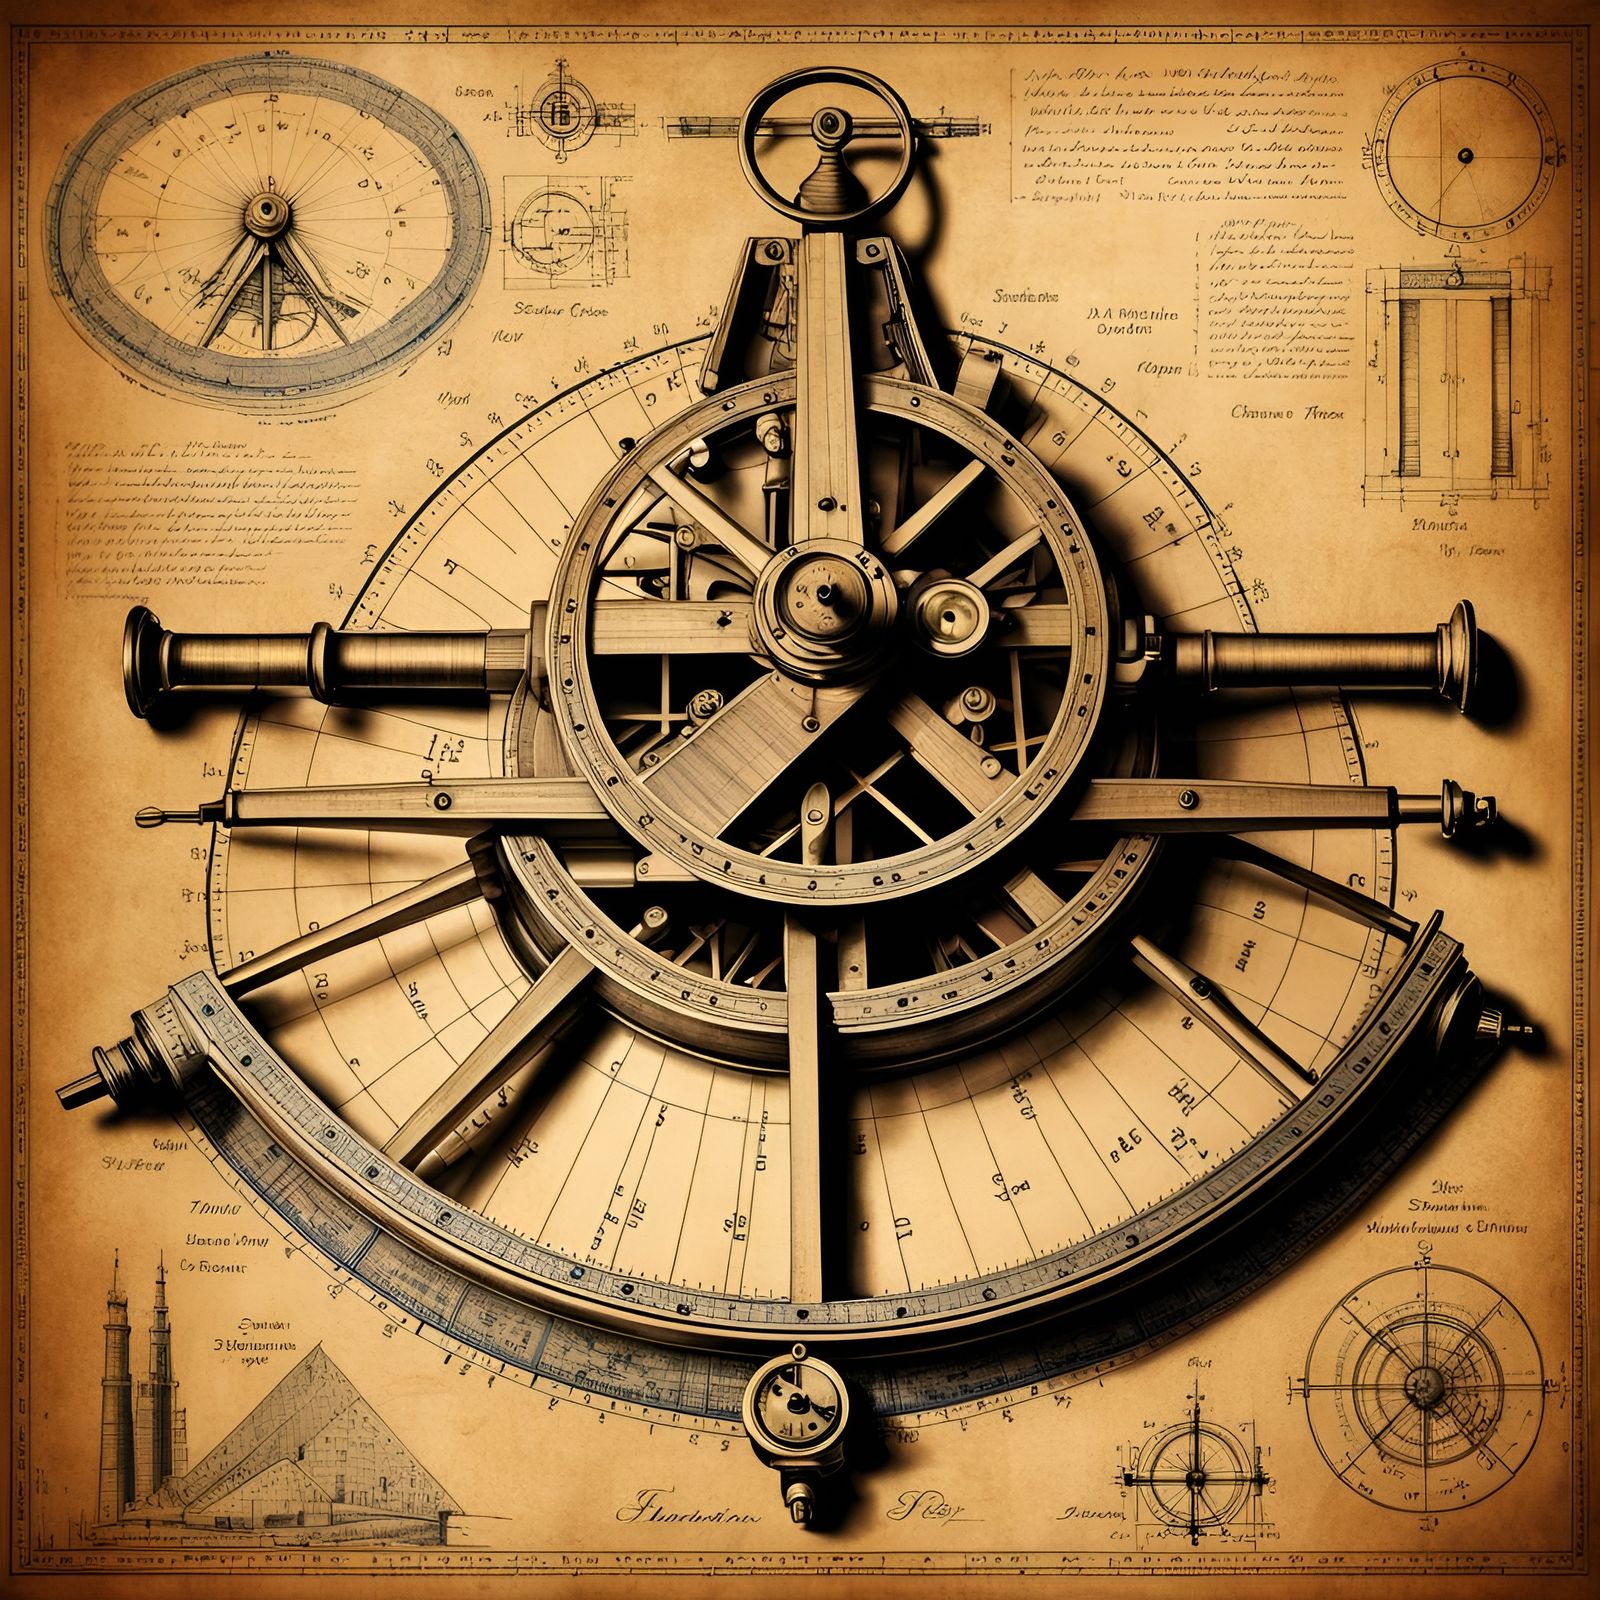 Ancient Technology: The Sextant